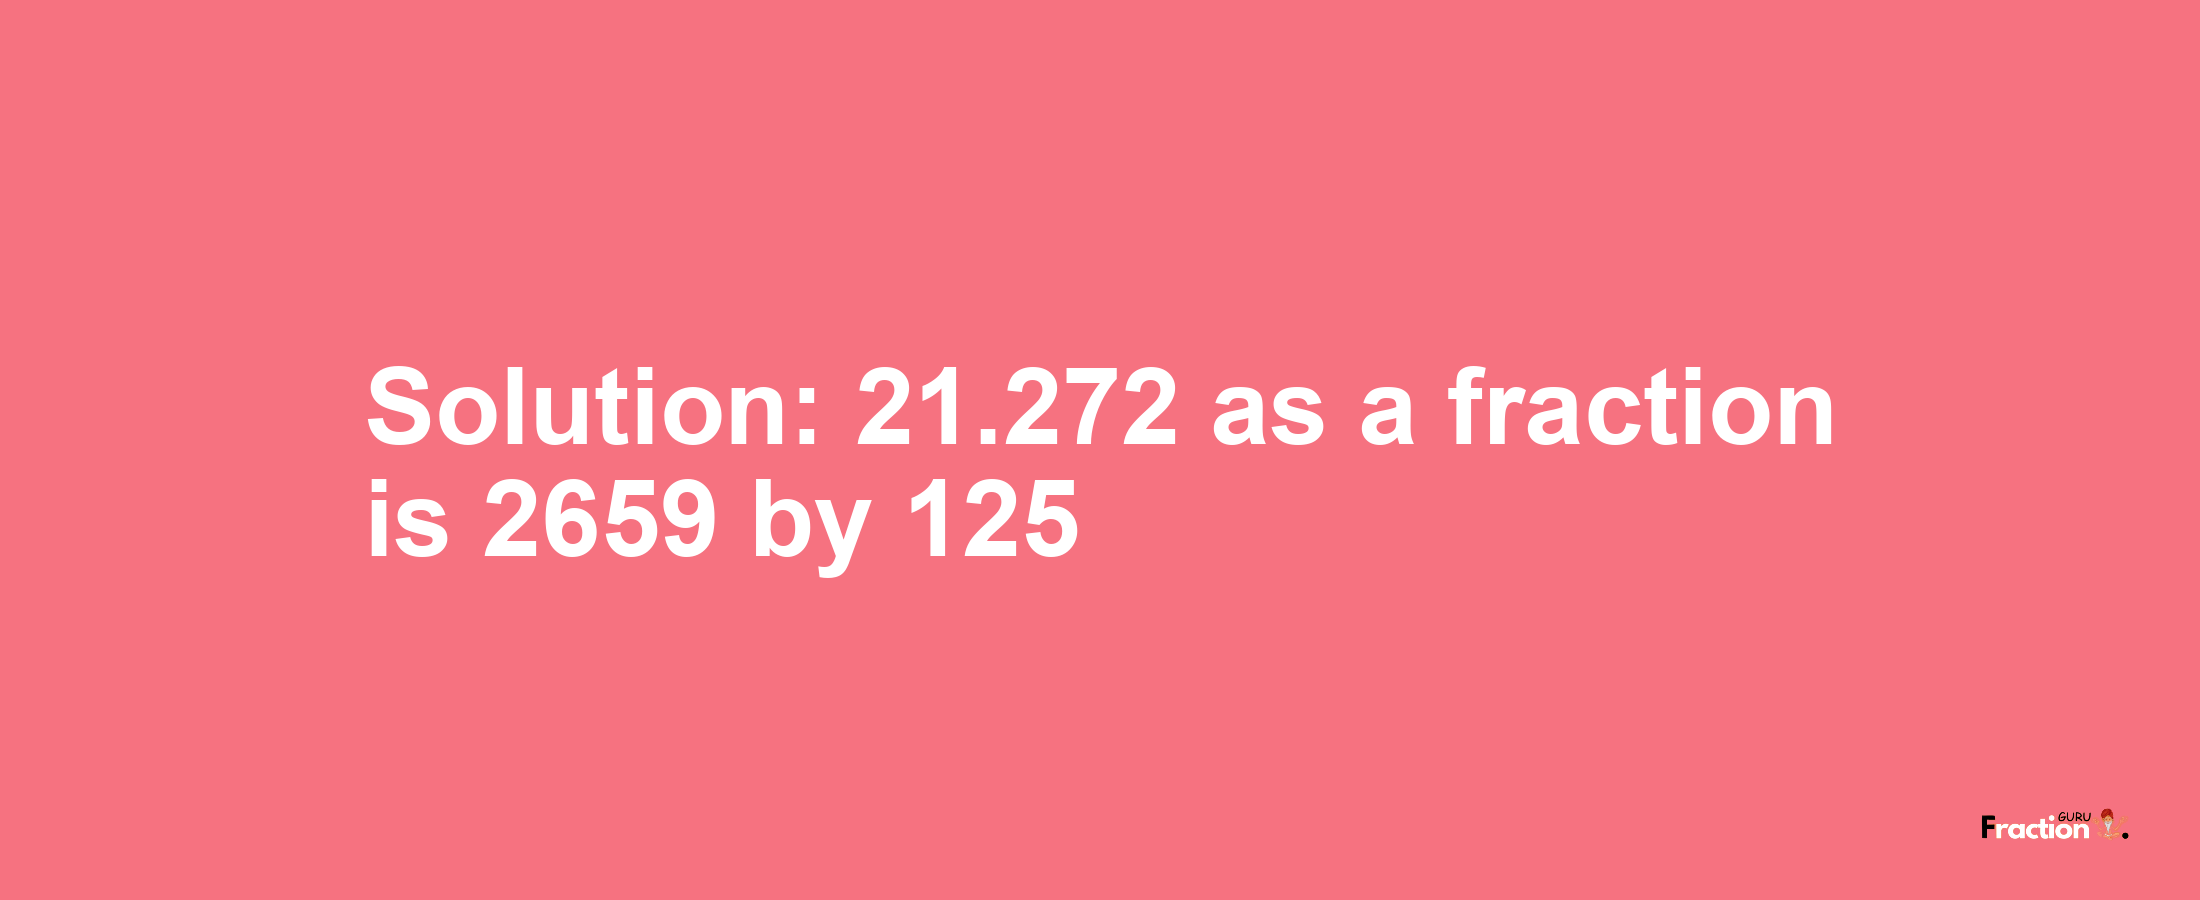 Solution:21.272 as a fraction is 2659/125